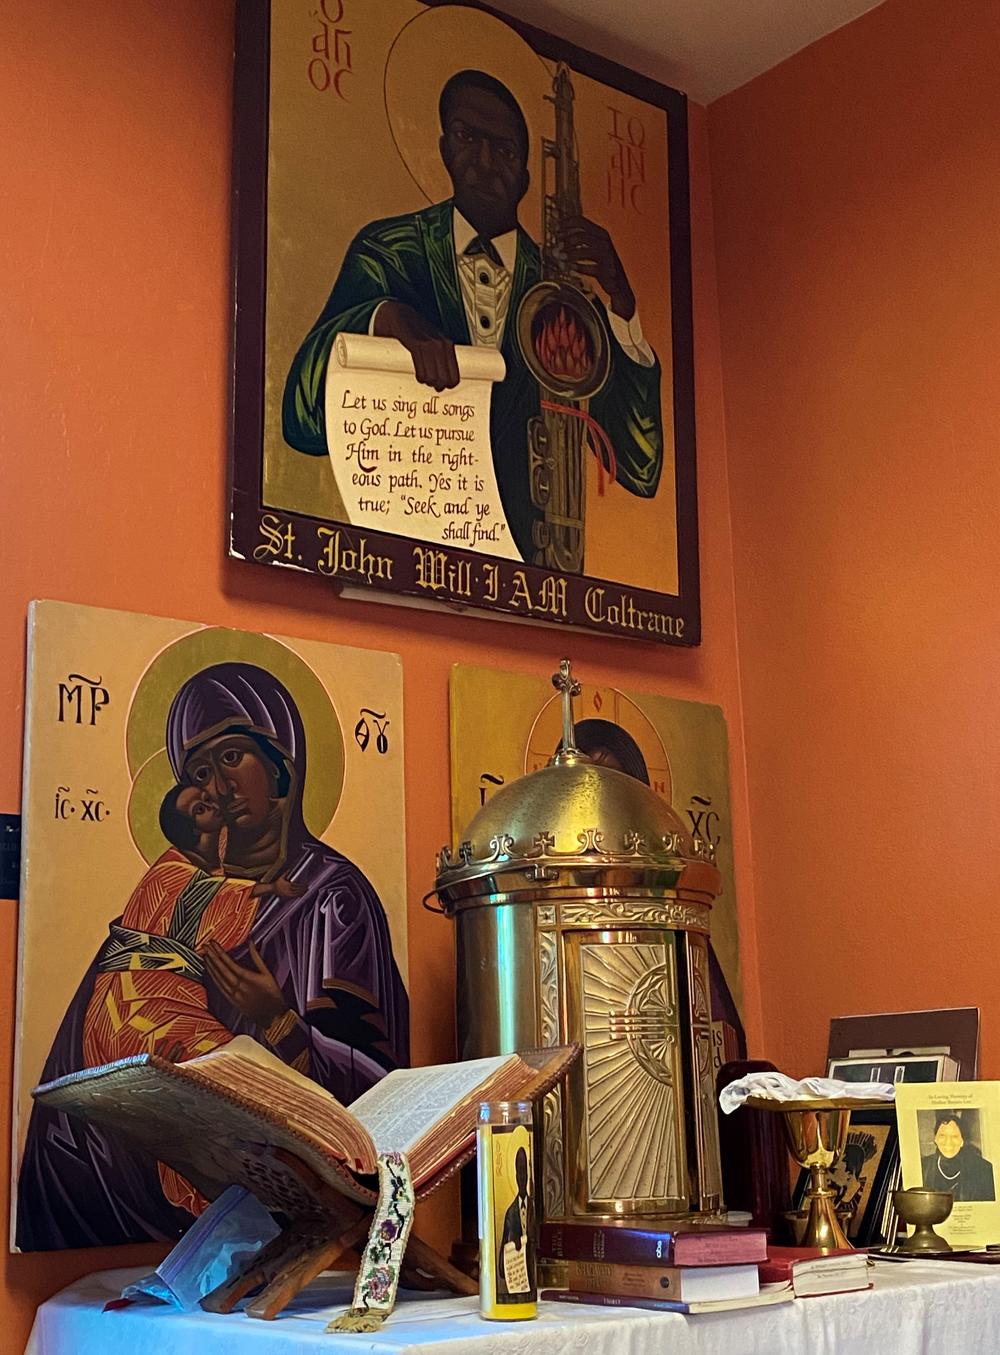 Byzantine-style icons, including ones of John Coltrane, the Virgin Mary and Jesus at the Coltrane-devoted church.